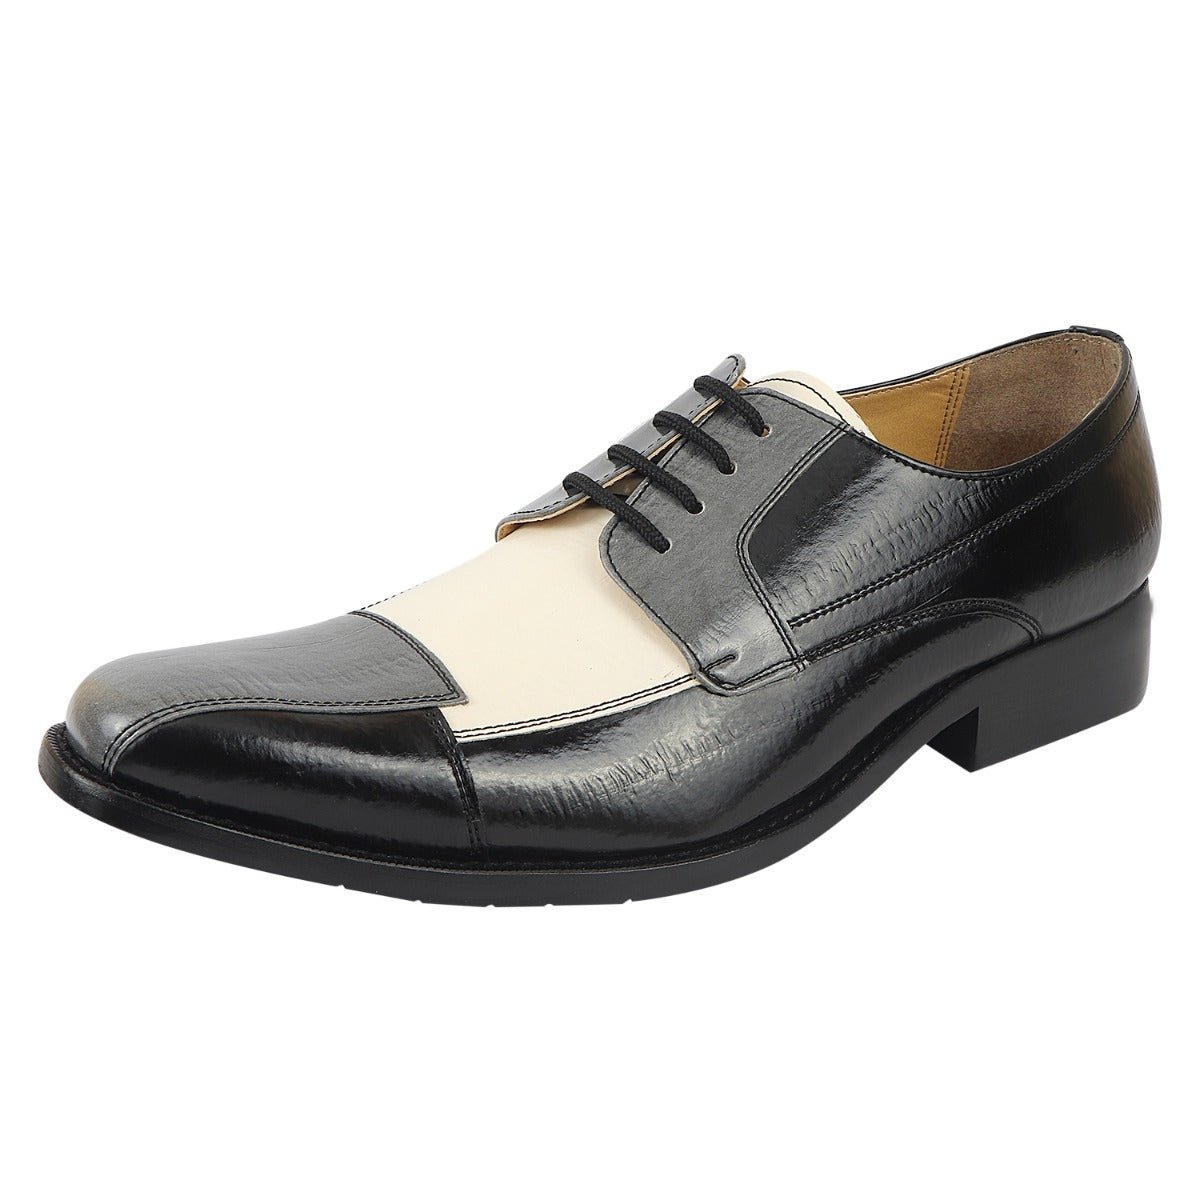 Alpha Leather Oxford Style Dress Shoes